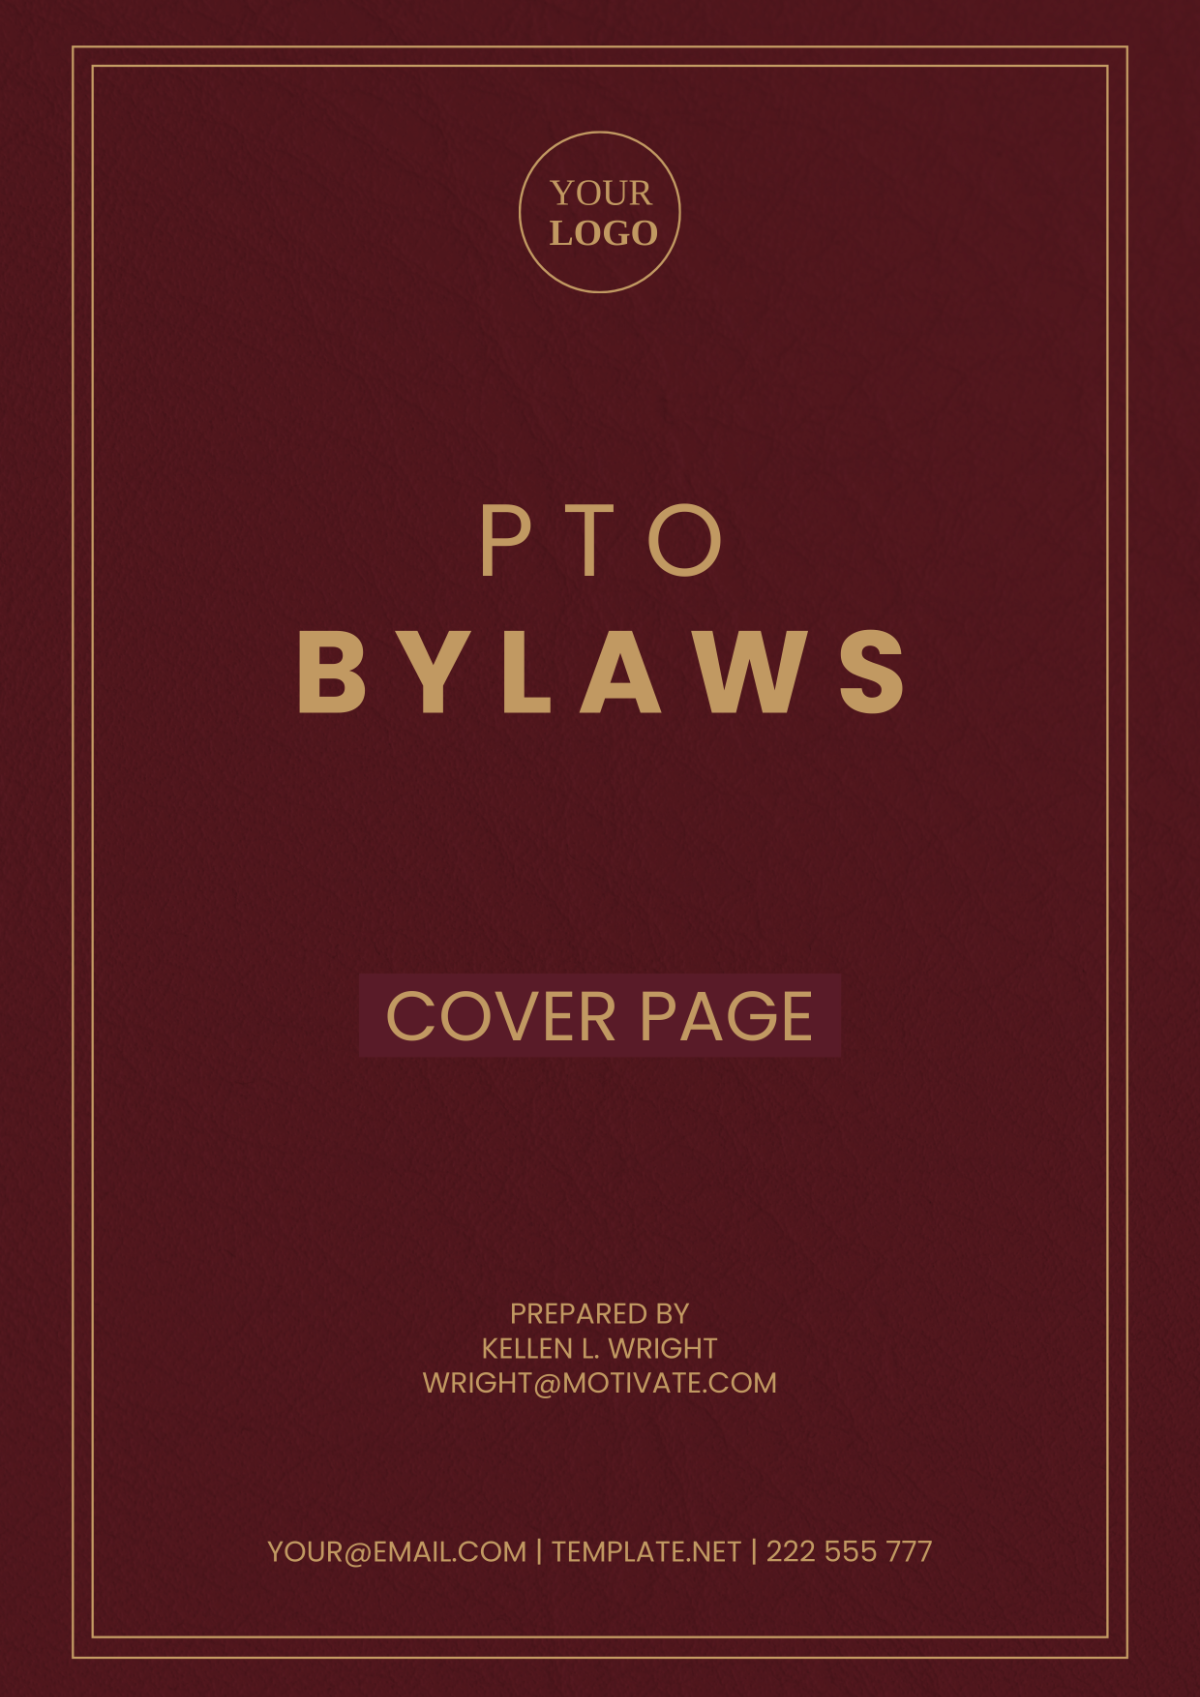 PTO Bylaws Cover Page